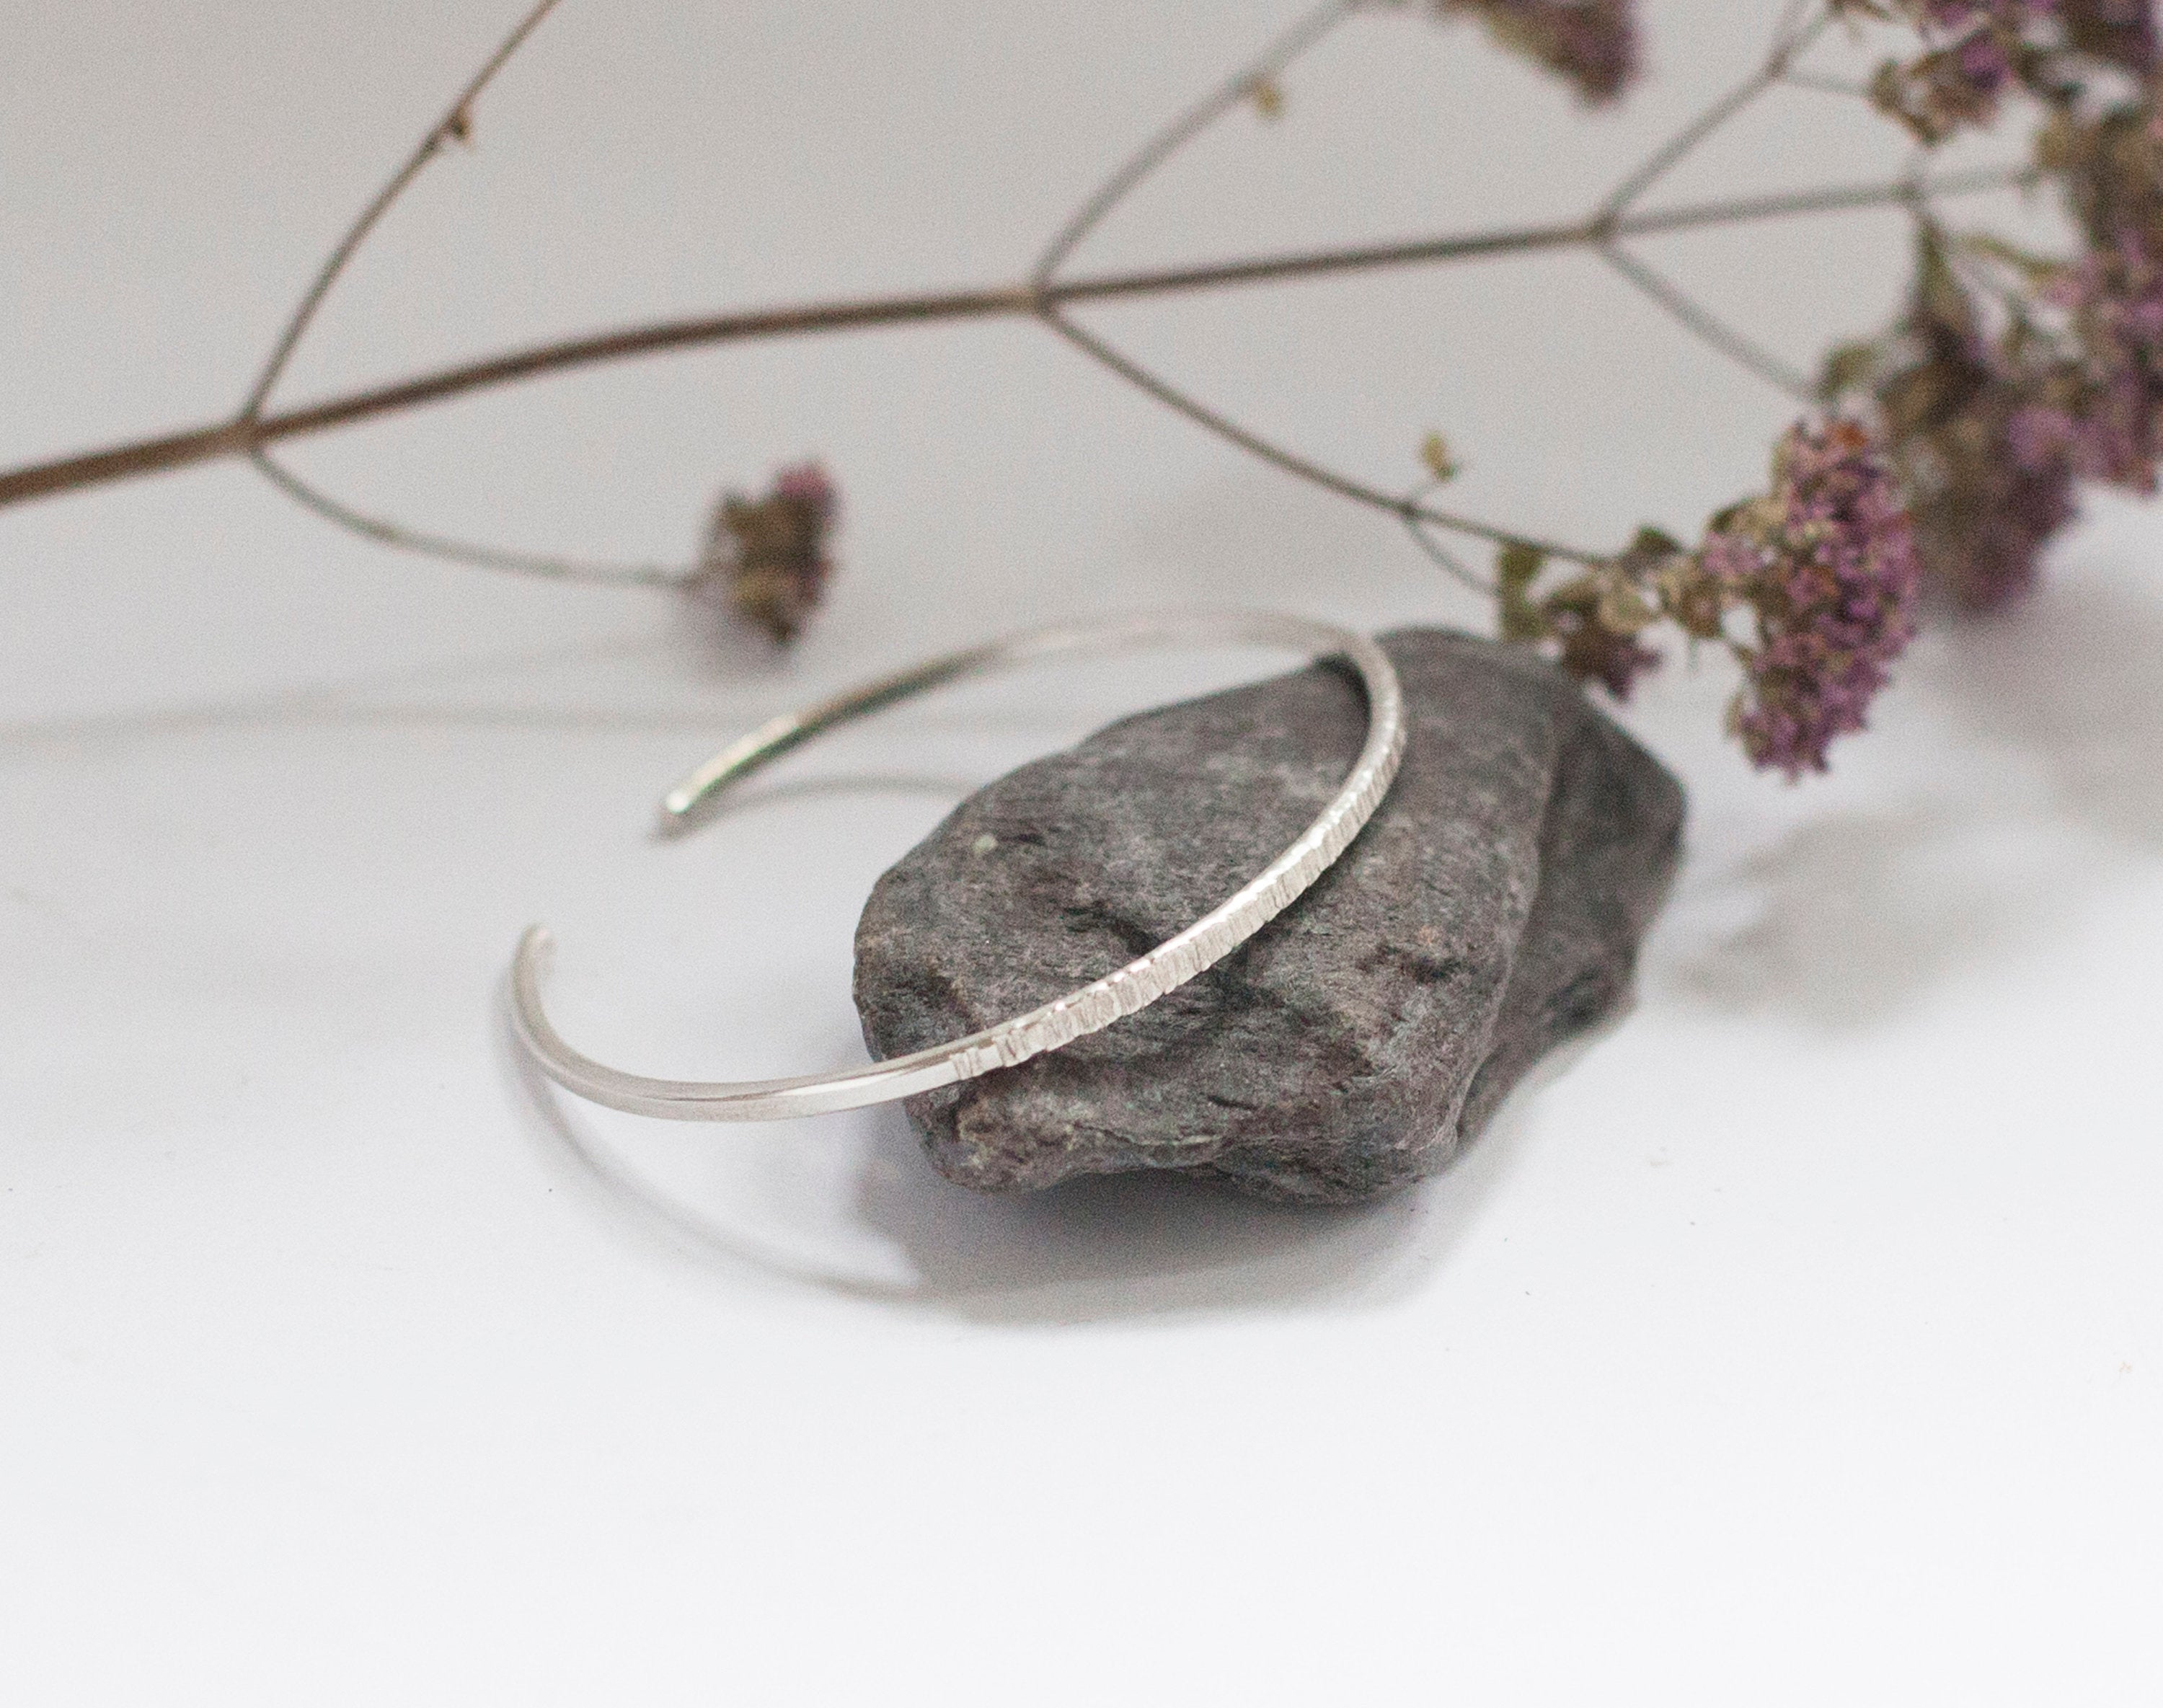 Thin silver bracelet with hammered texture  (made to order)